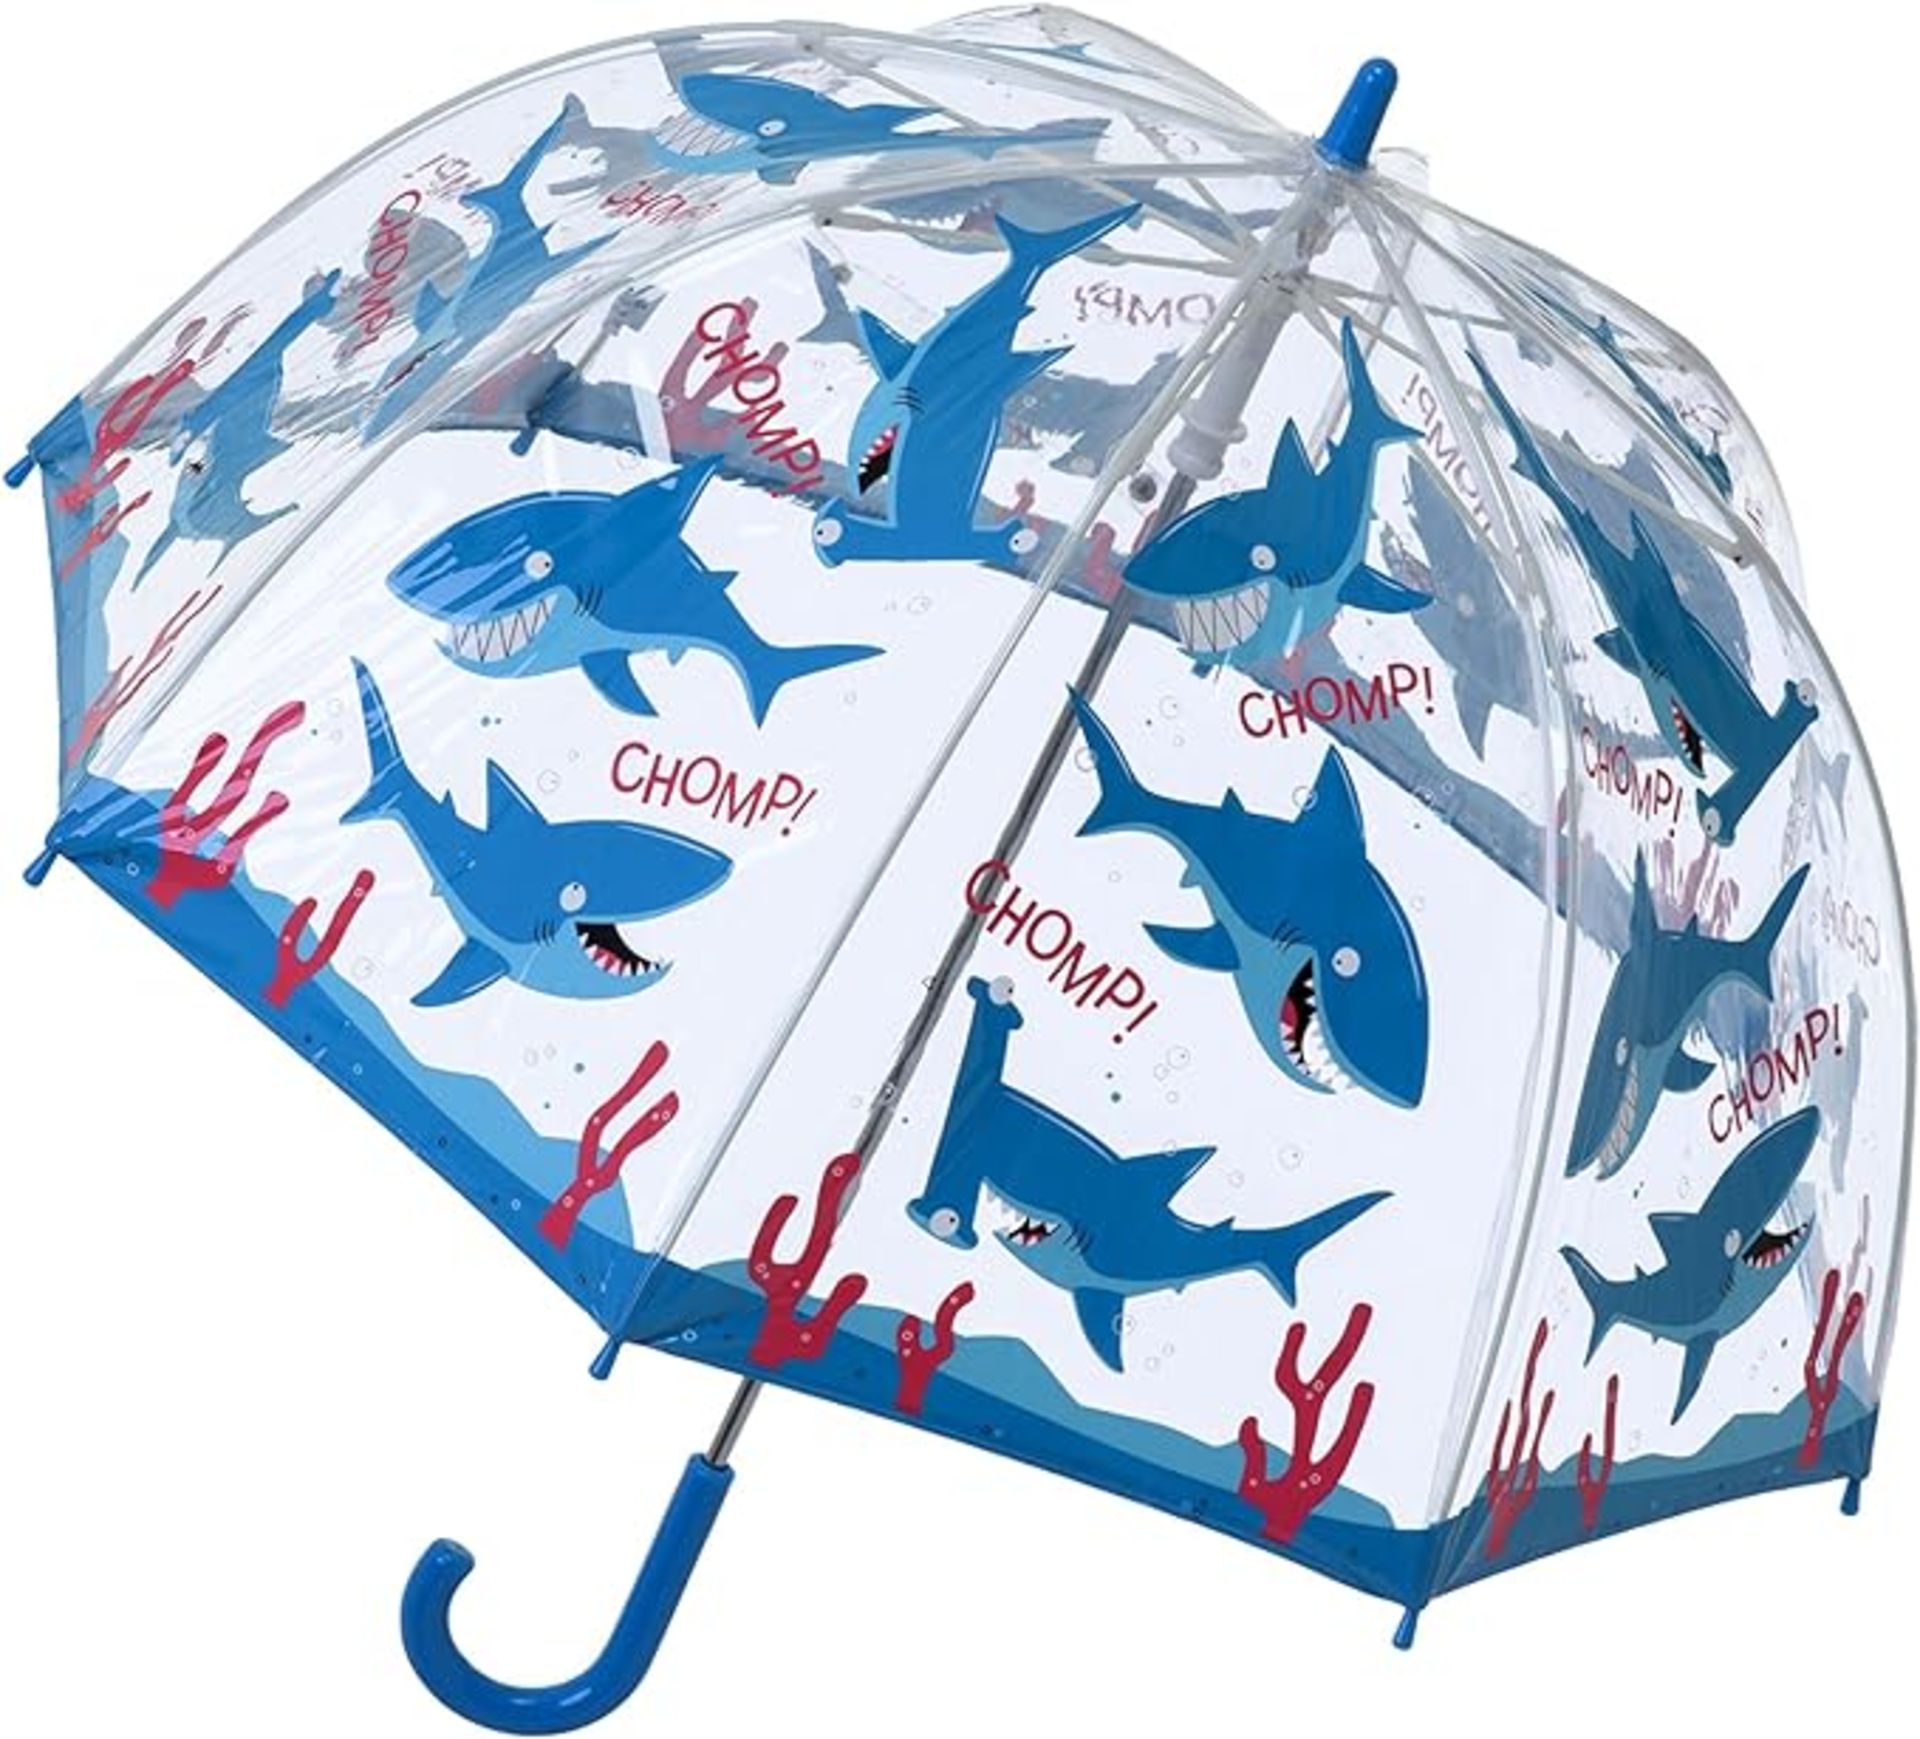 Bugzz kids stuff kids brolly (Delivery Band A)